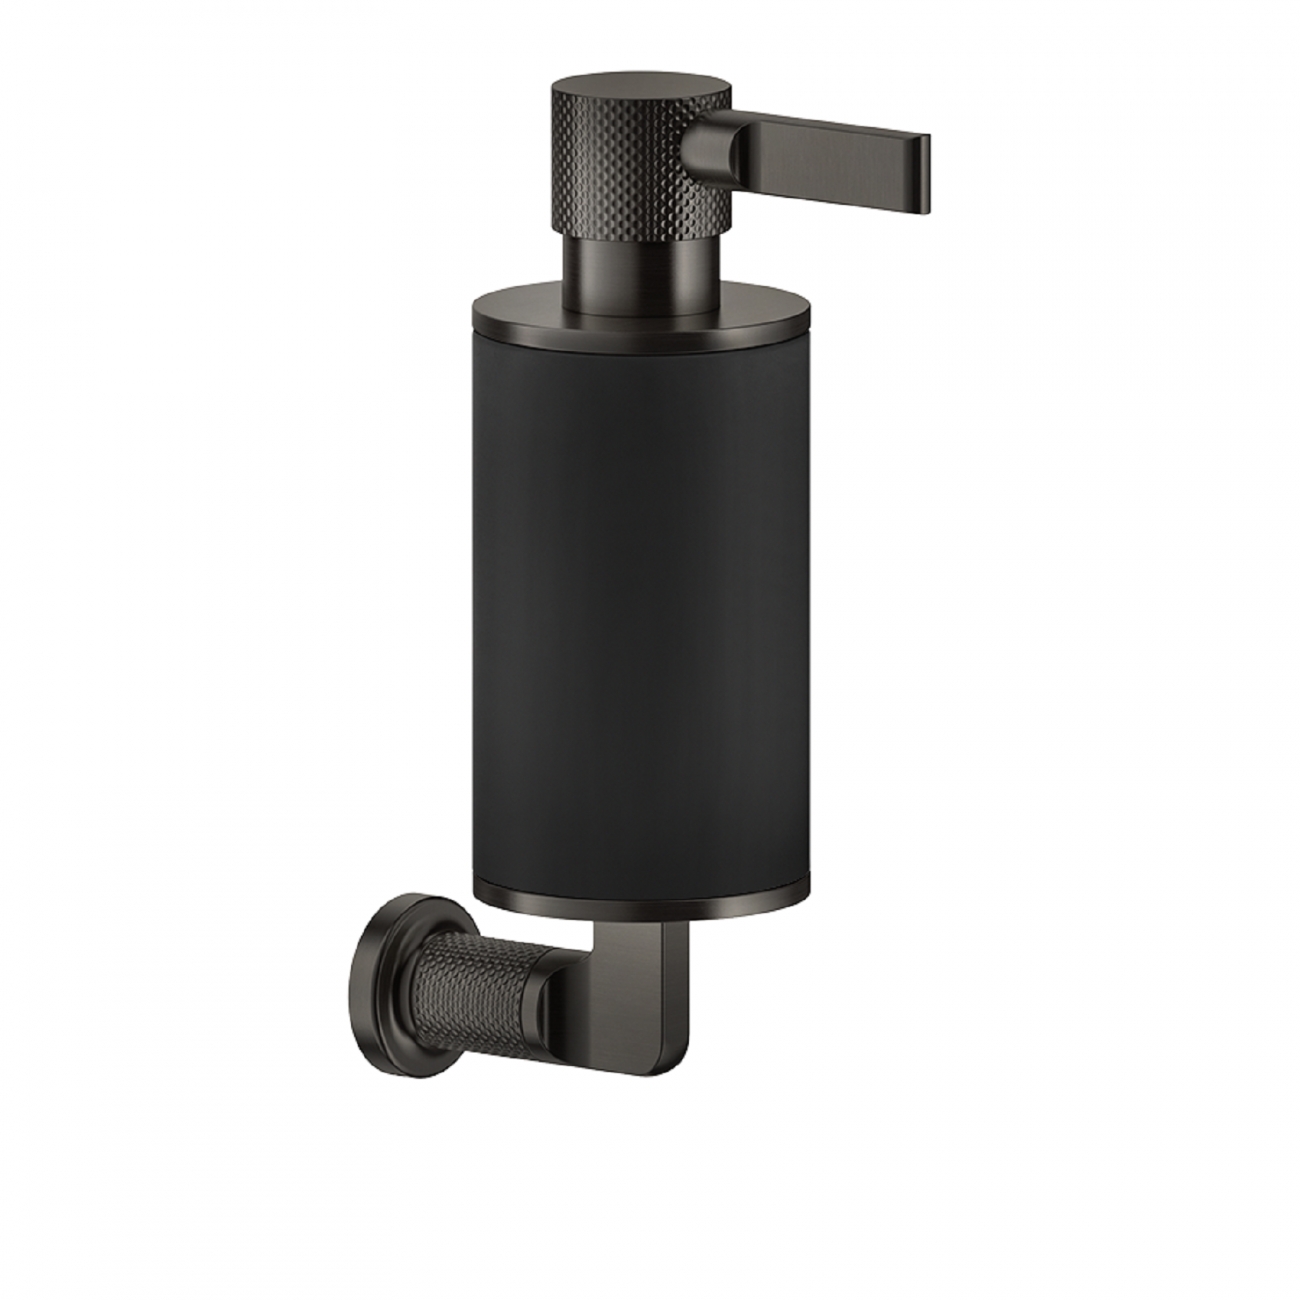 GESSI INCISO WALL MOUNTED SOAP DISPENSER HOLDER GESSI CHROME 031